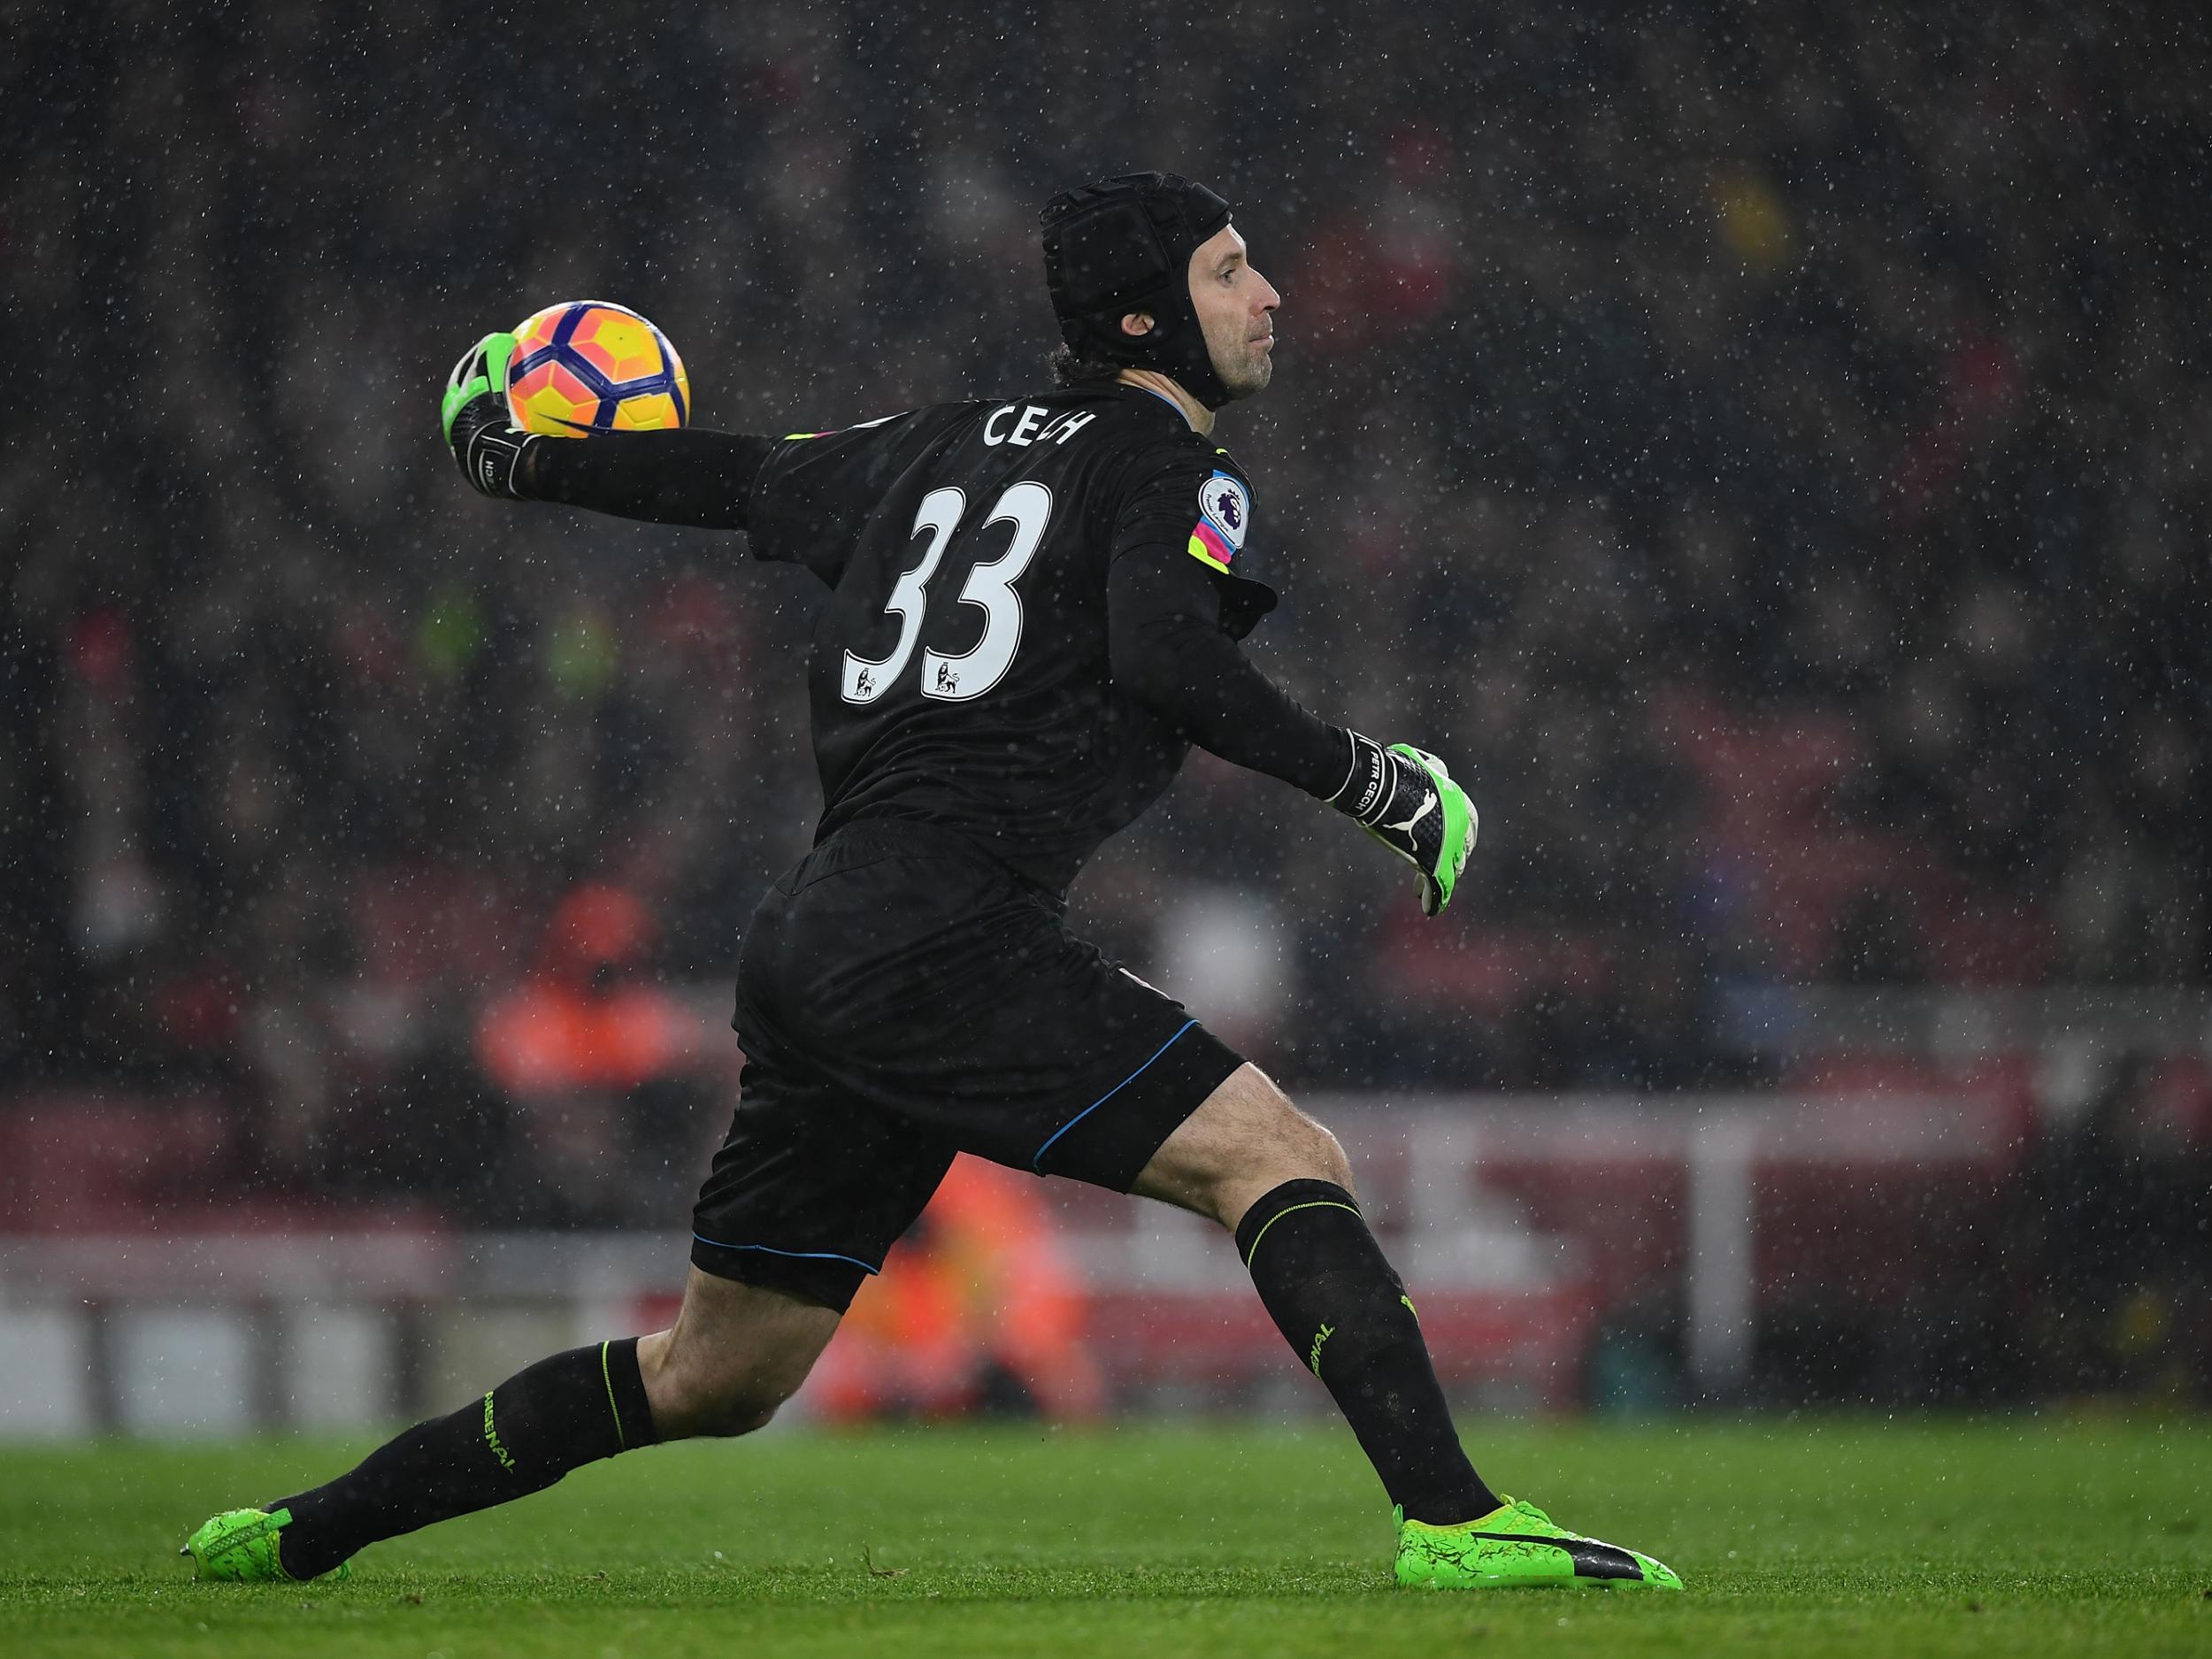 Cech spared Arsenal's blushes